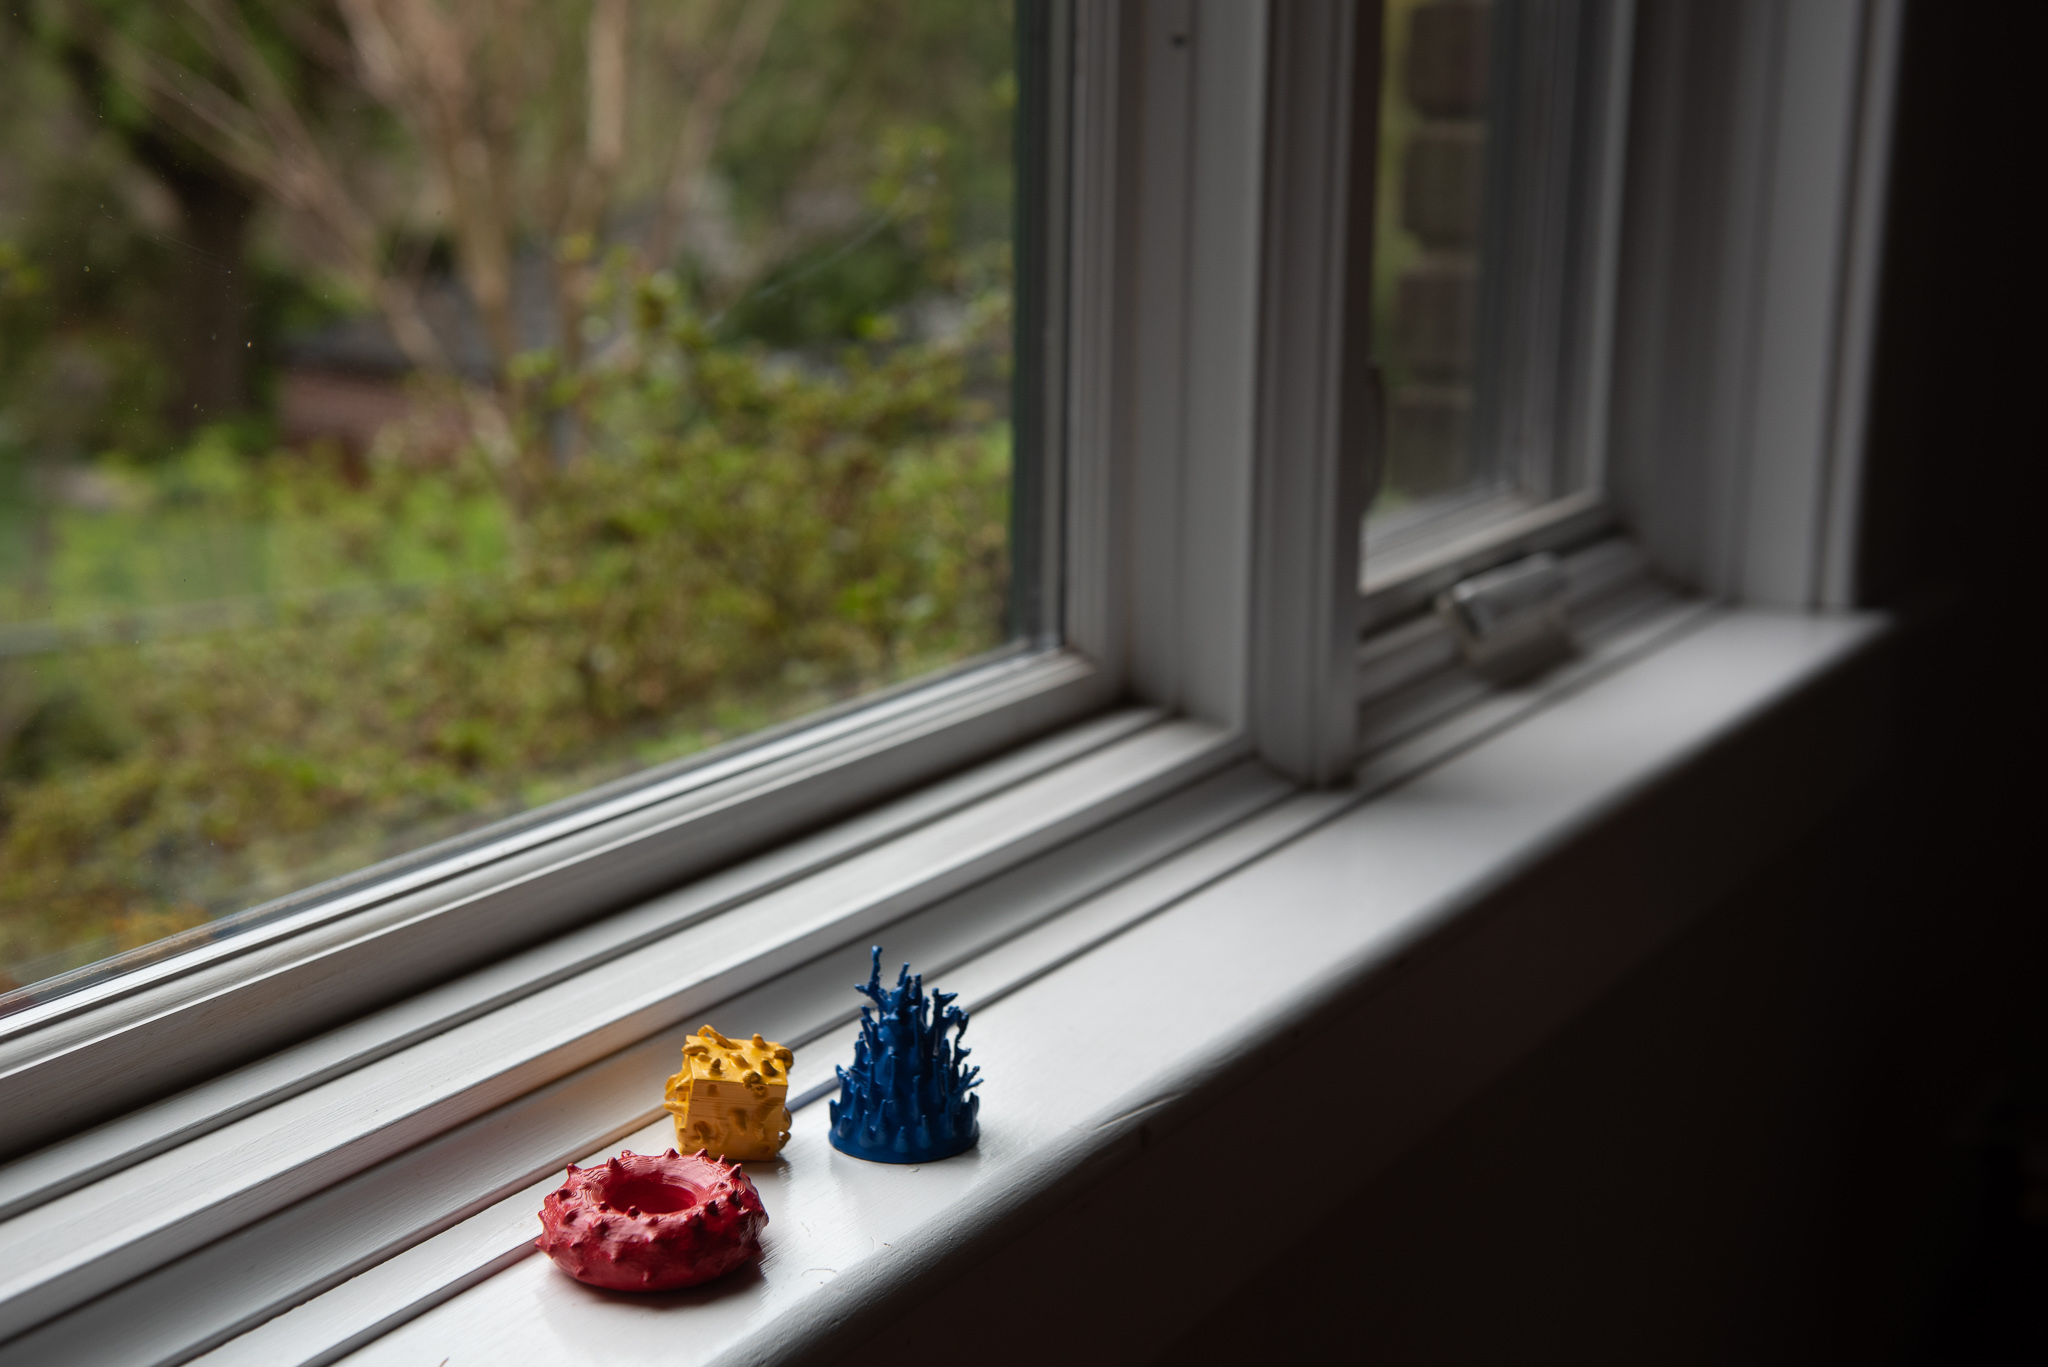 Full View - three small shapes sit on a windowsill: a spiky red donut, a yellow cube with wiggly protrusions, and a blue cone with tree-like branches.